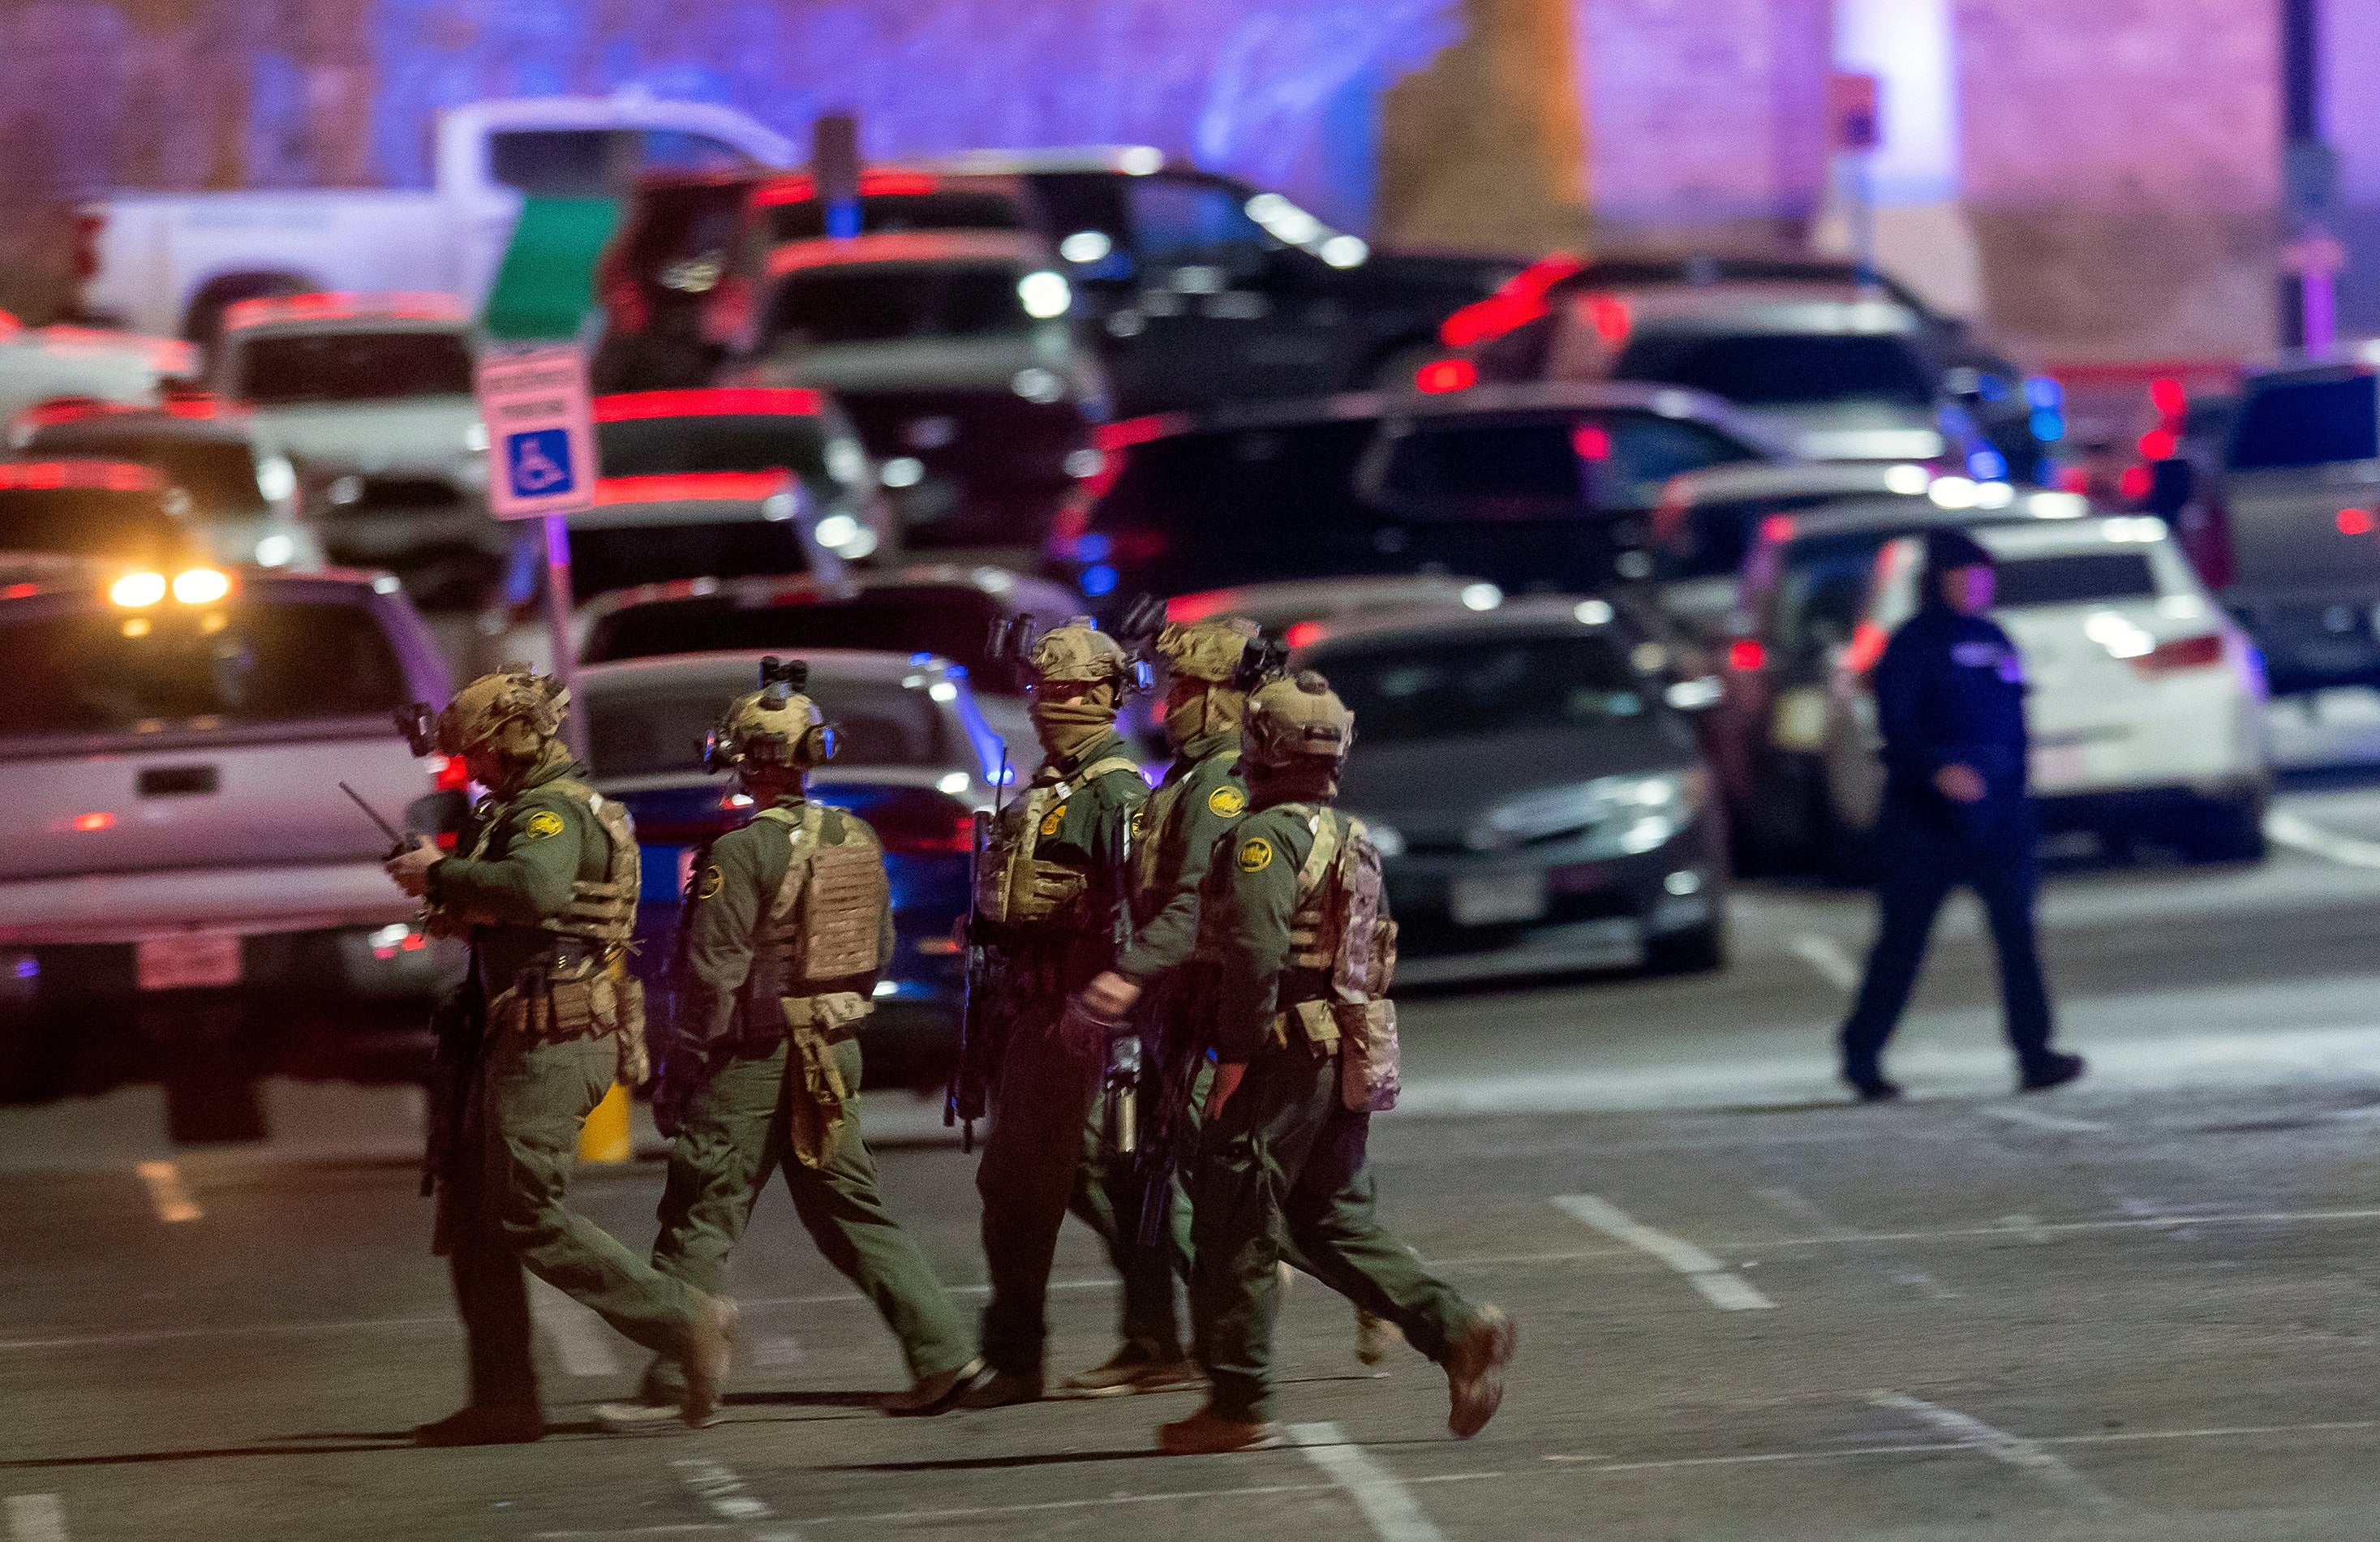 File: Law enforcement agents walk in the parking lot of a shopping mall, Wednesday, Feb. 15, 2023, in El Paso, Texas